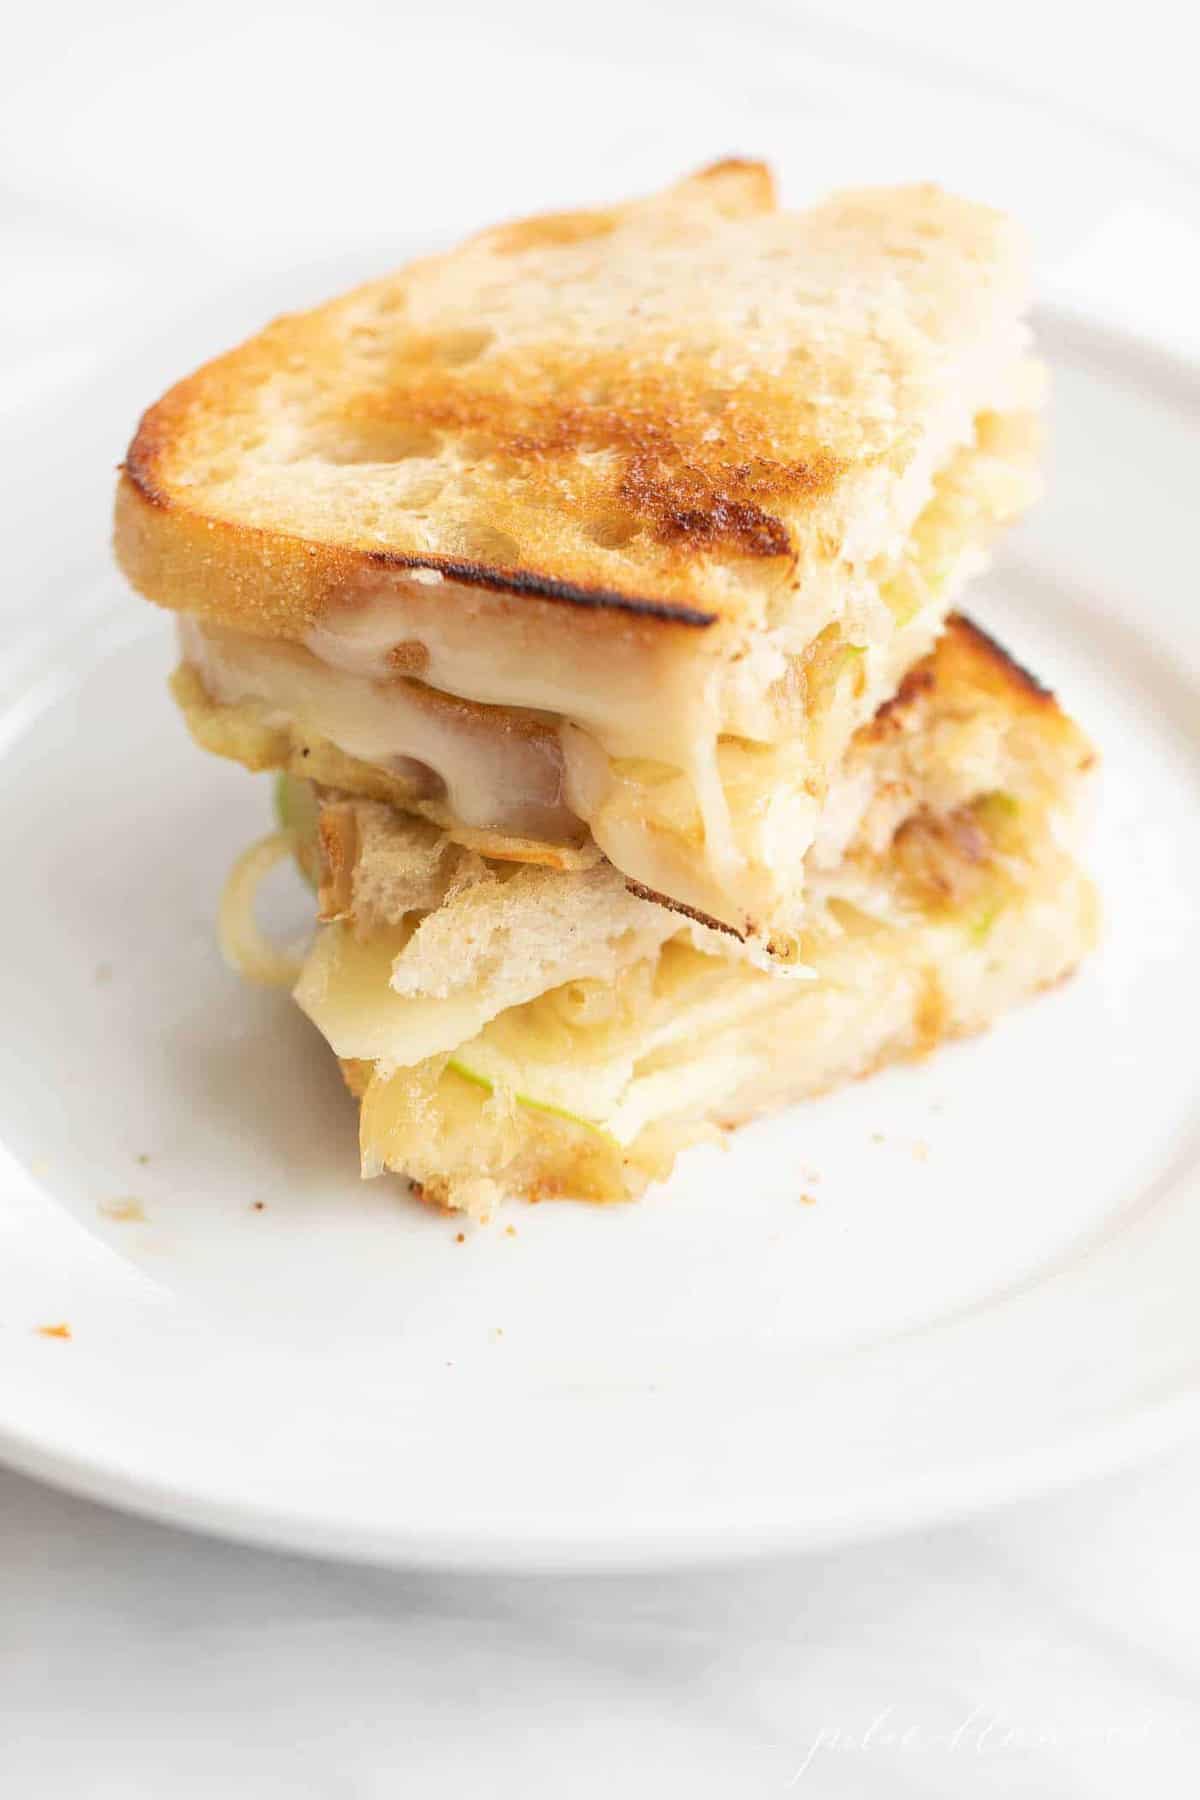 White plate with a sliced and stacked gourmet grilled cheese sandwich.